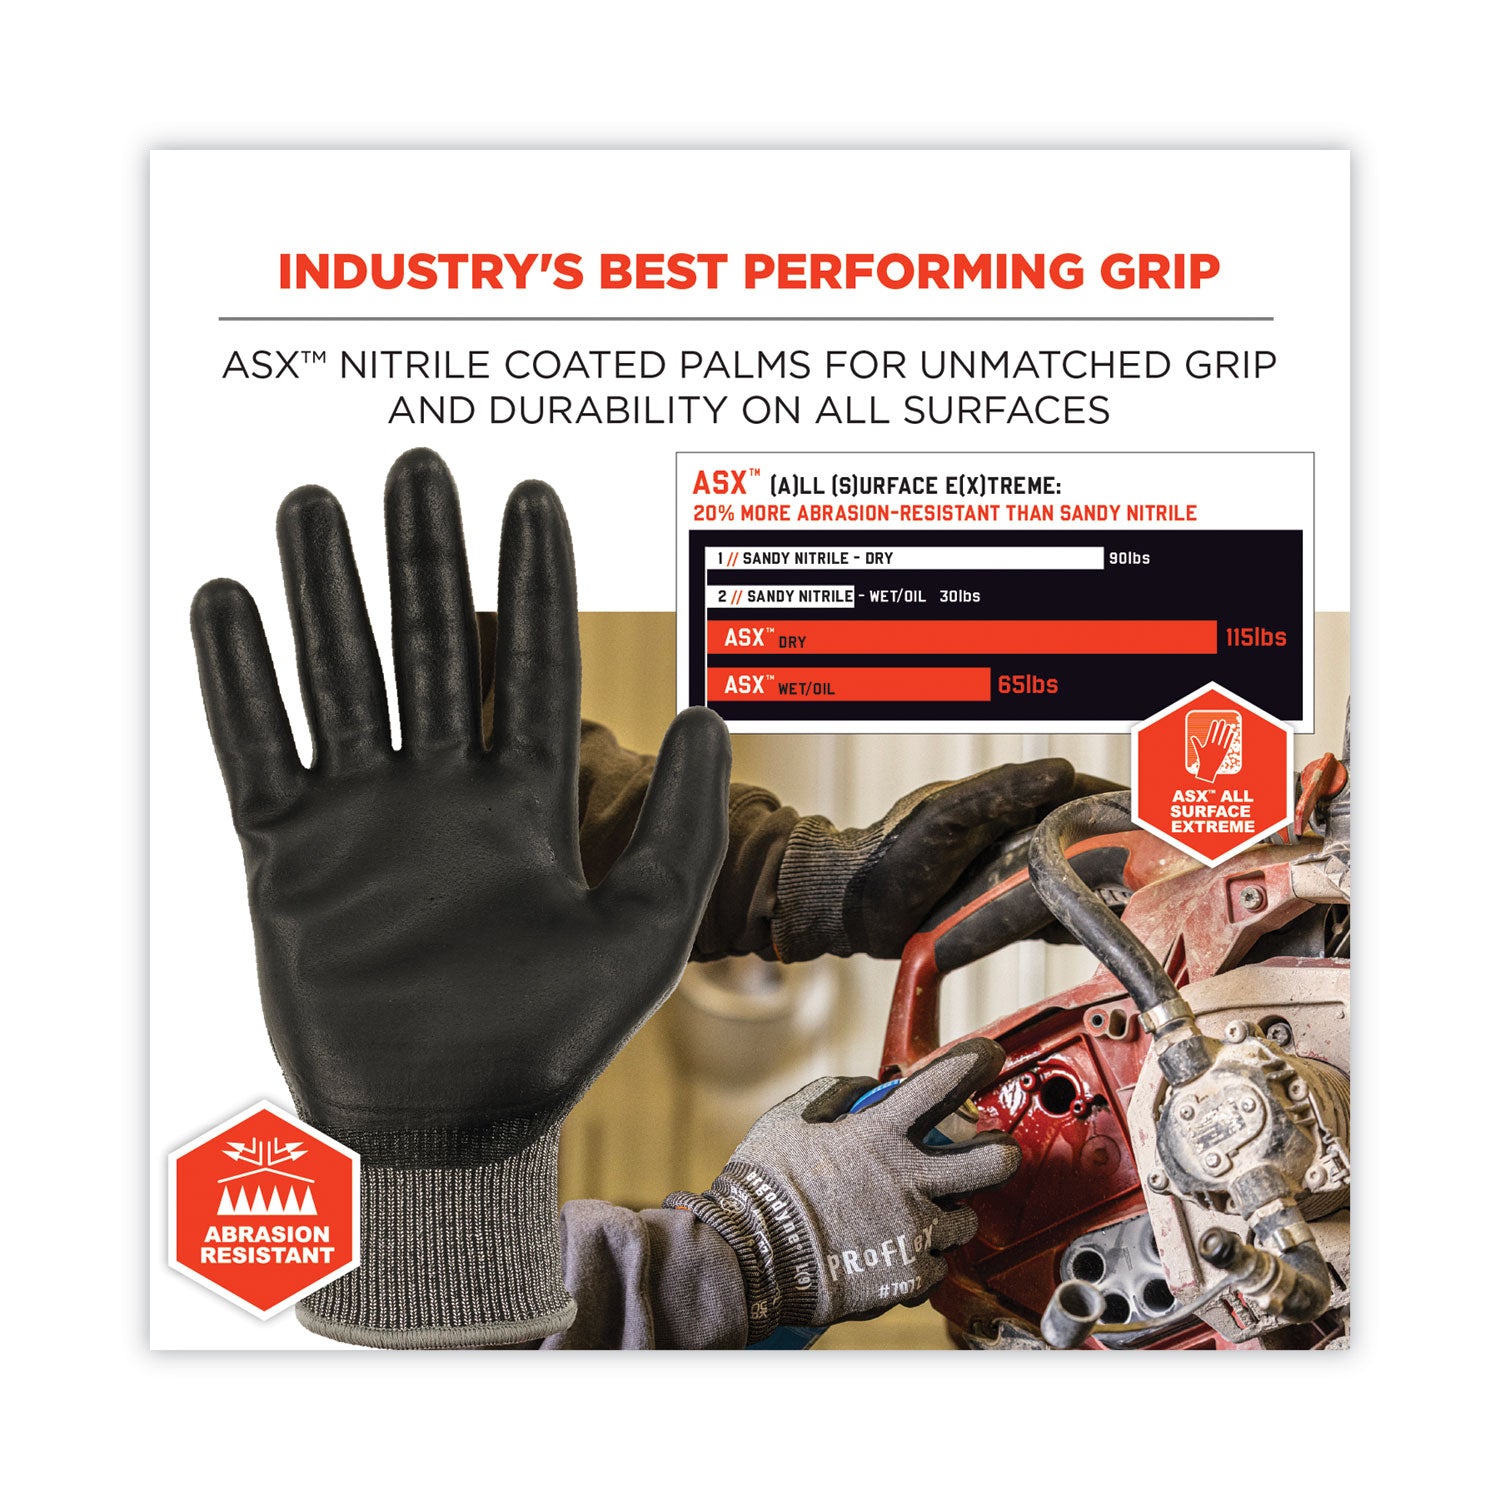 proflex-7072-ansi-a7-nitrile-coated-cr-gloves-gray-small-12-pairs-pack-ships-in-1-3-business-days_ego10302 - 5